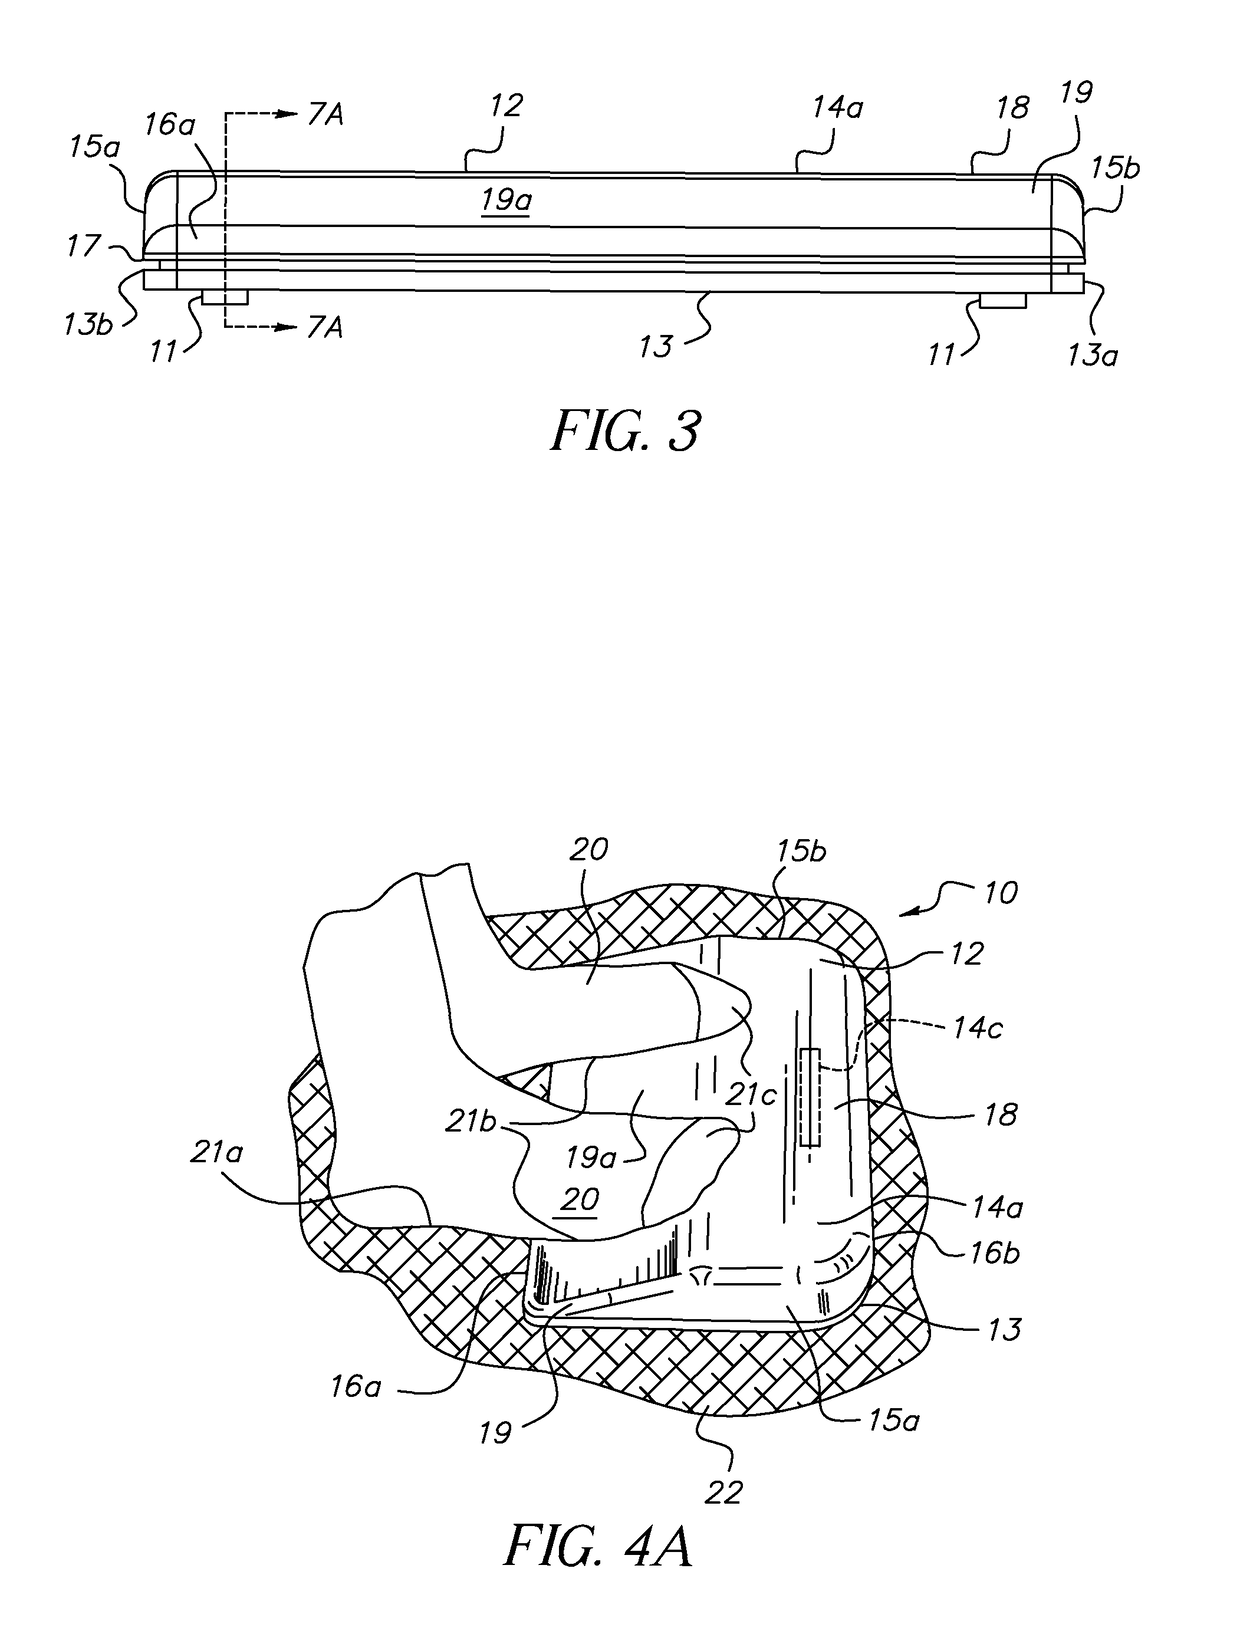 Device for applying stimulation to the foot or feet of a person